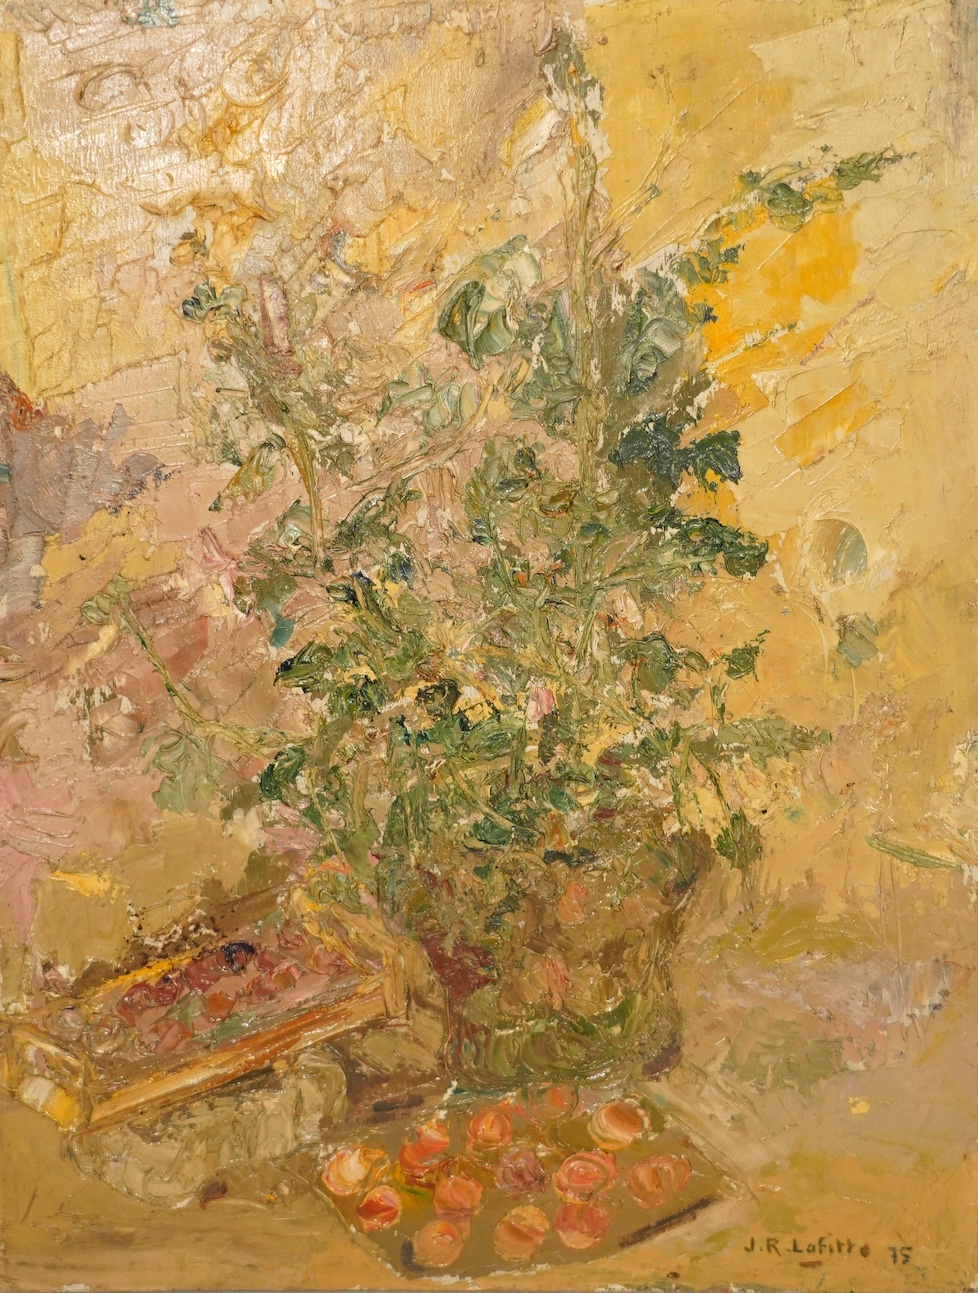 Jean-Roger Lafitte (French, 1922-2005), impasto oil on board, Still life of flowers in a vase, signed and dated '75, 36 x 27cm, unframed. Condition - fair